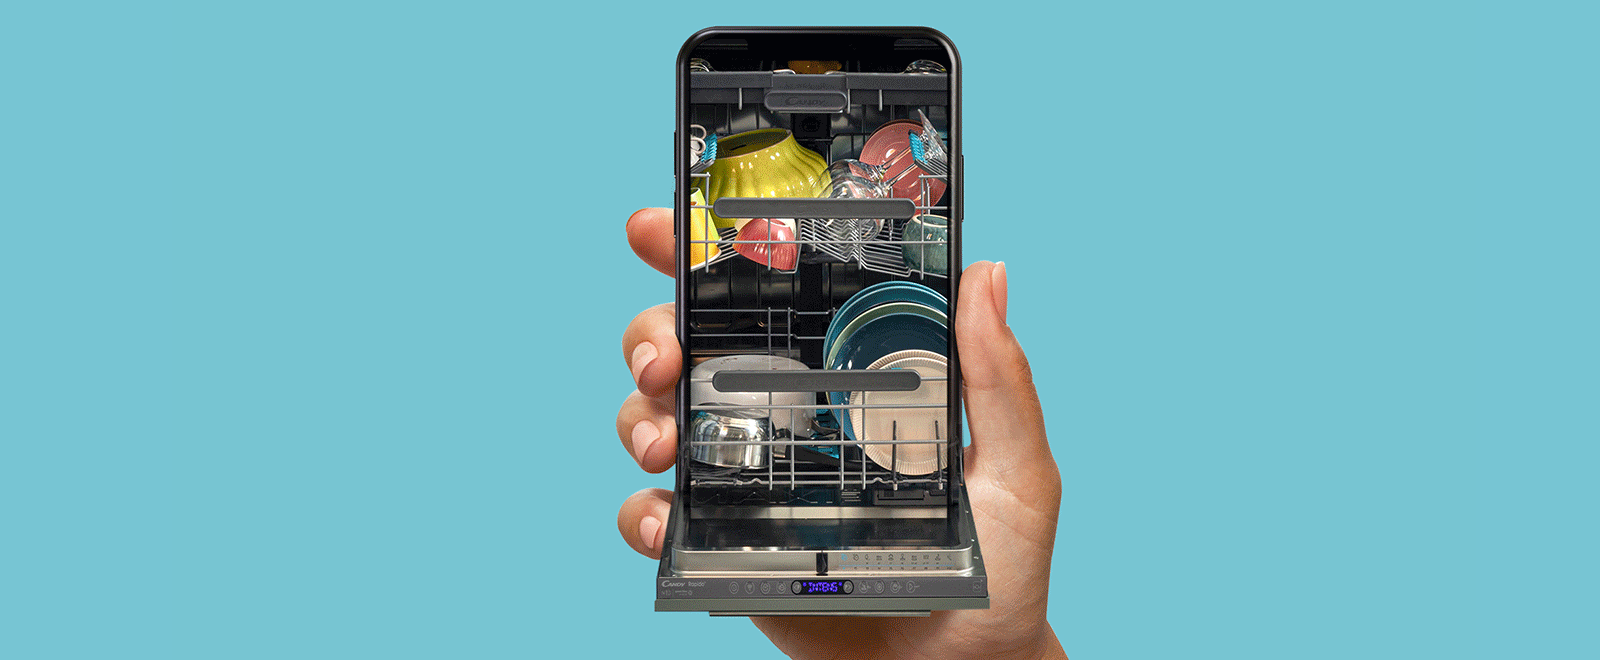 Connected Dishwasher